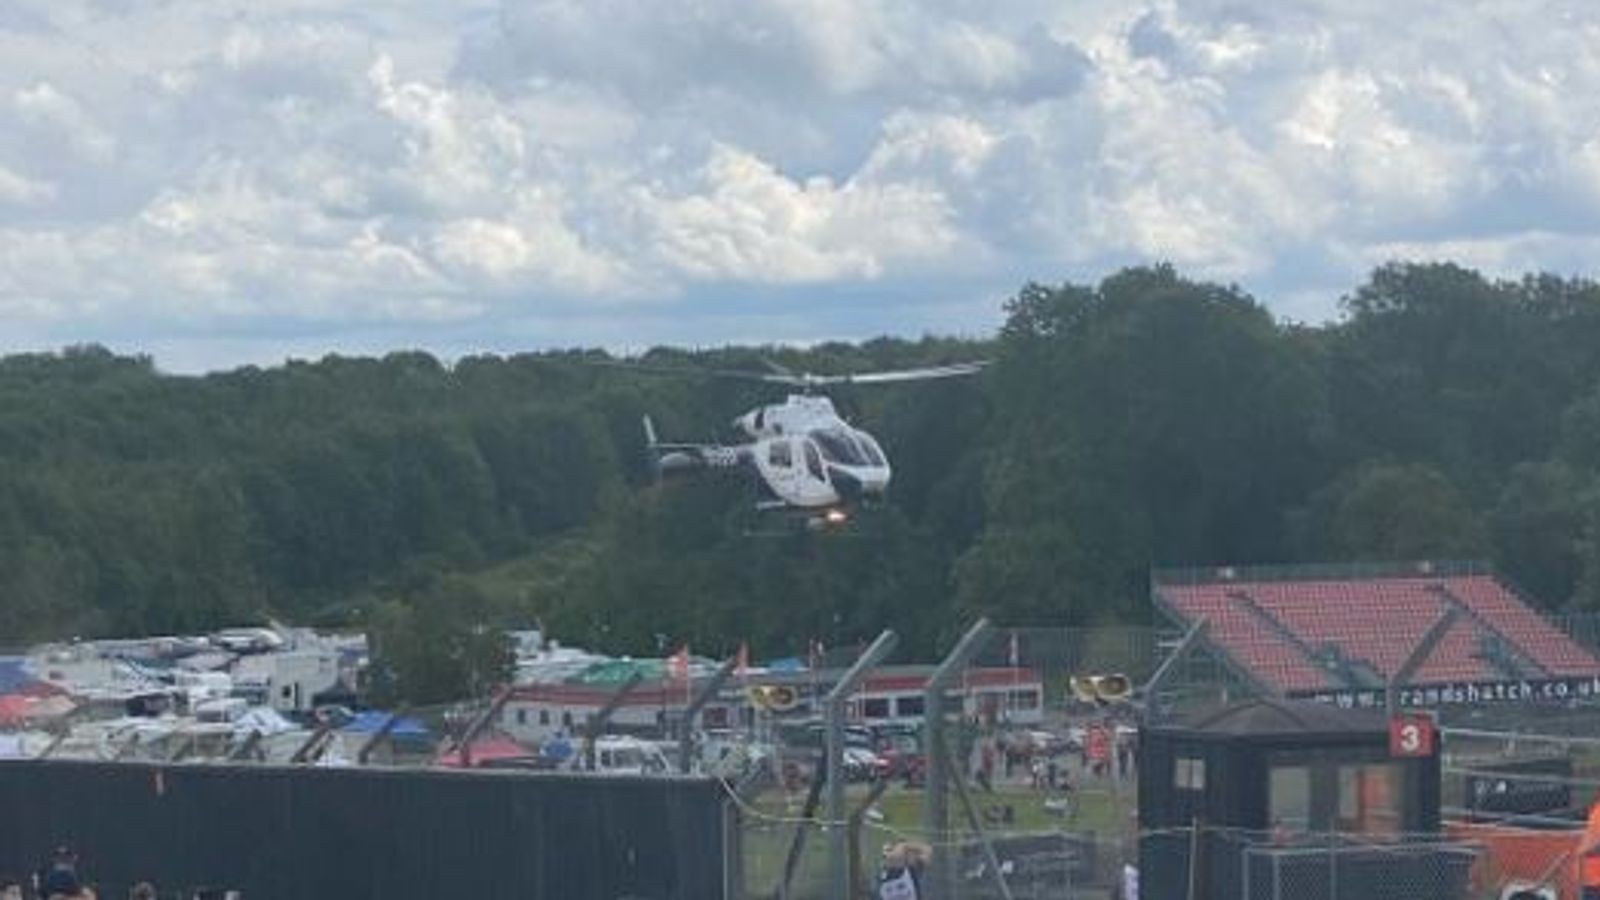 Race marshal killed in crash at Brands Hatch circuit | UK ...